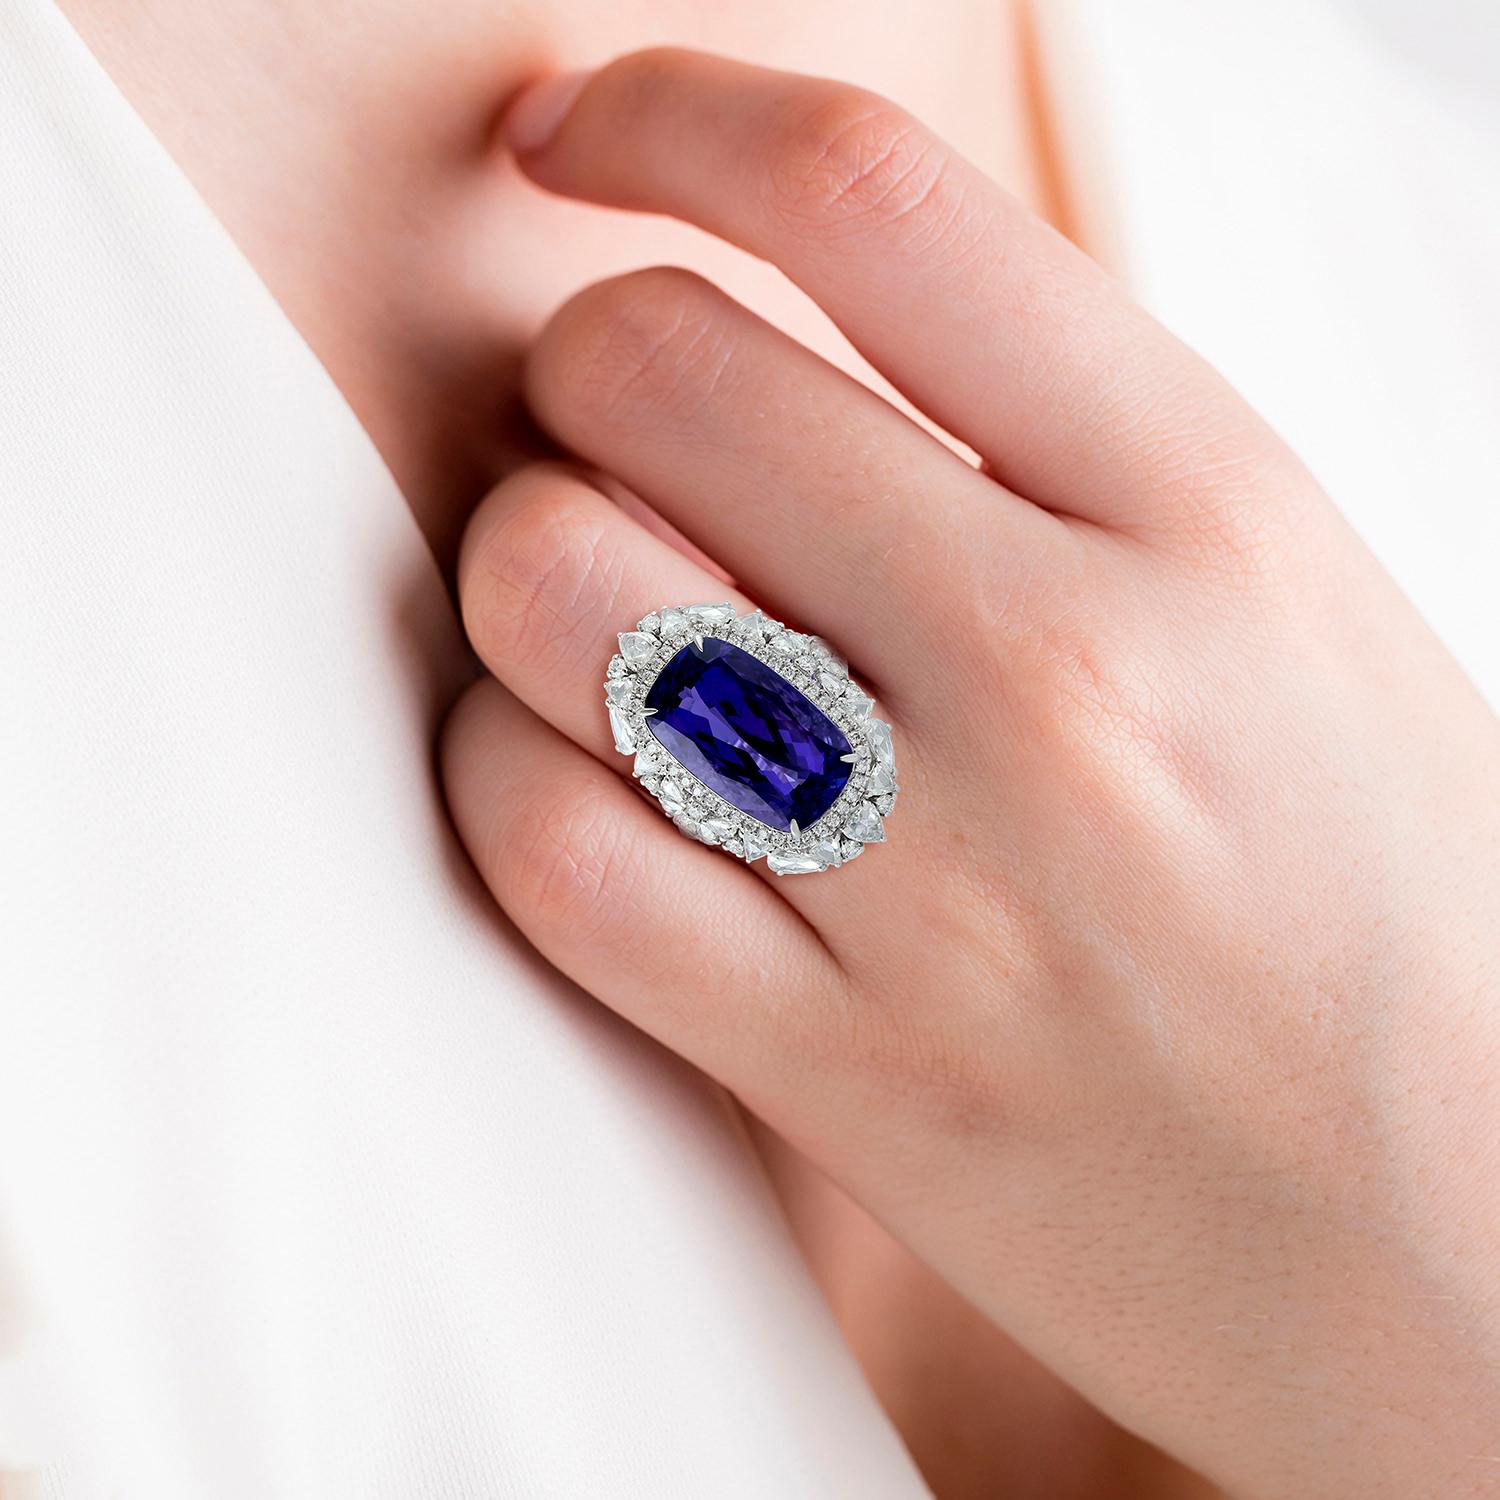 This stunning ring has been meticulously crafted from 18-karat gold. It is hand set with 14.21 carats tanzanite and illuminated with 2.1 carats of sparkling diamonds. 

The ring is a size 7 and may be resized to larger or smaller upon request.